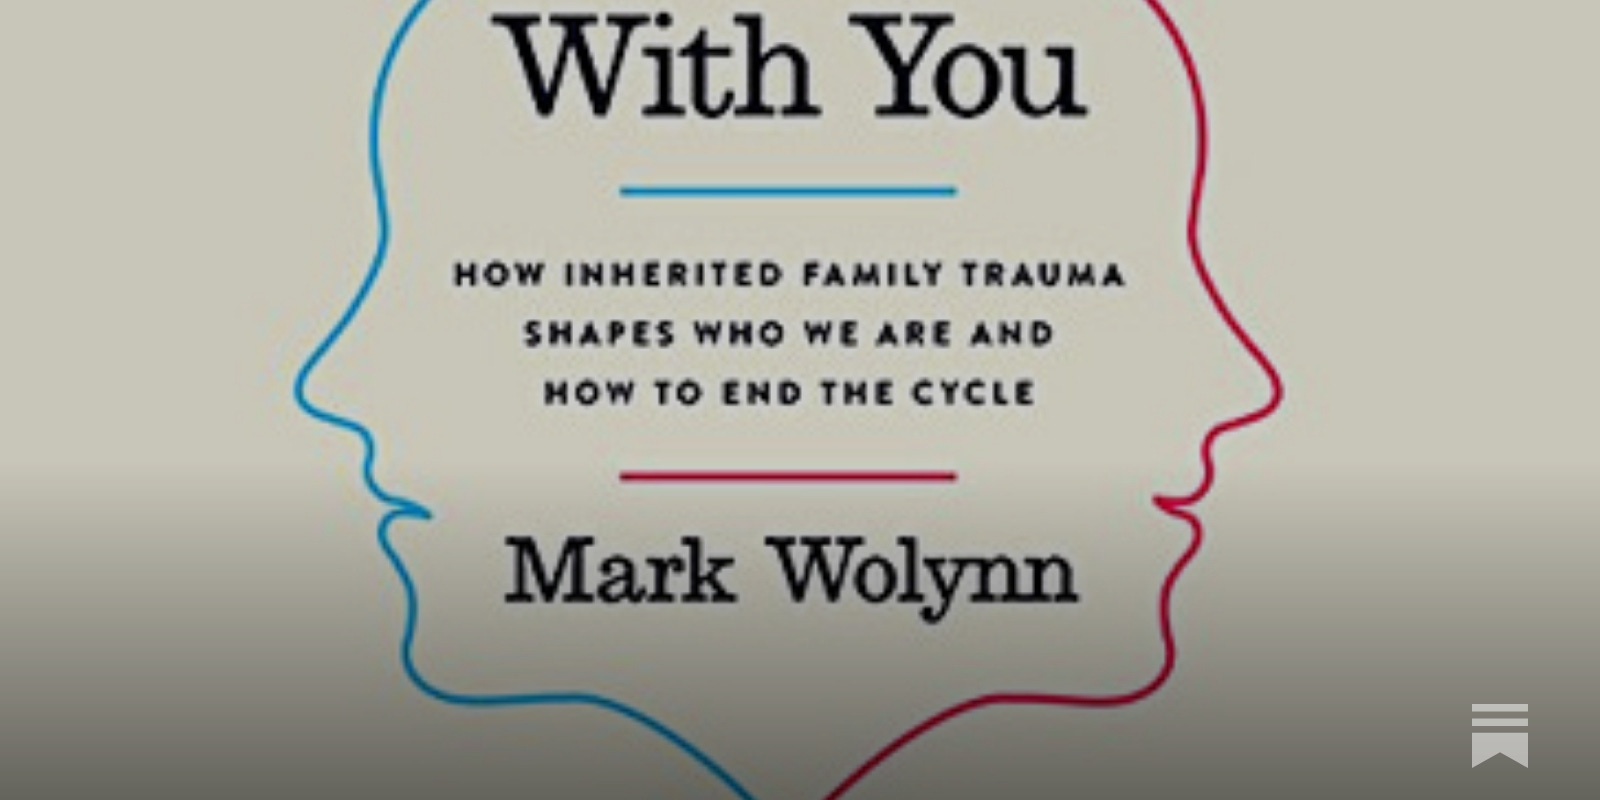 Summary of Mark Wolynn's It Didn't Start with You on Apple Books